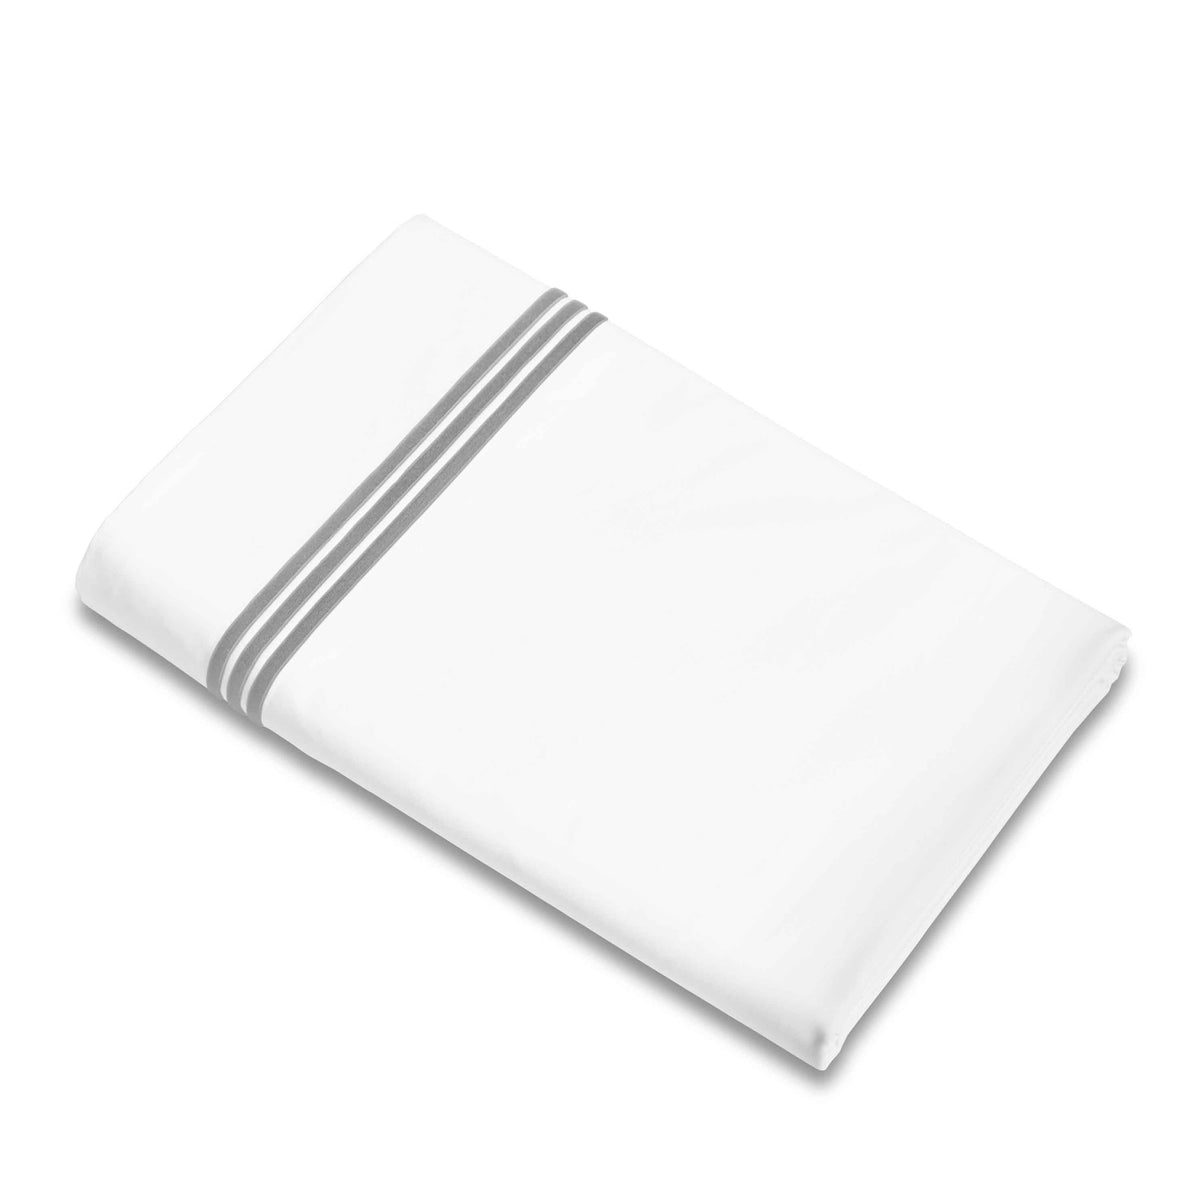 Flat Sheet of Signoria Platinum Percale Bedding in White/Silver Moon Color